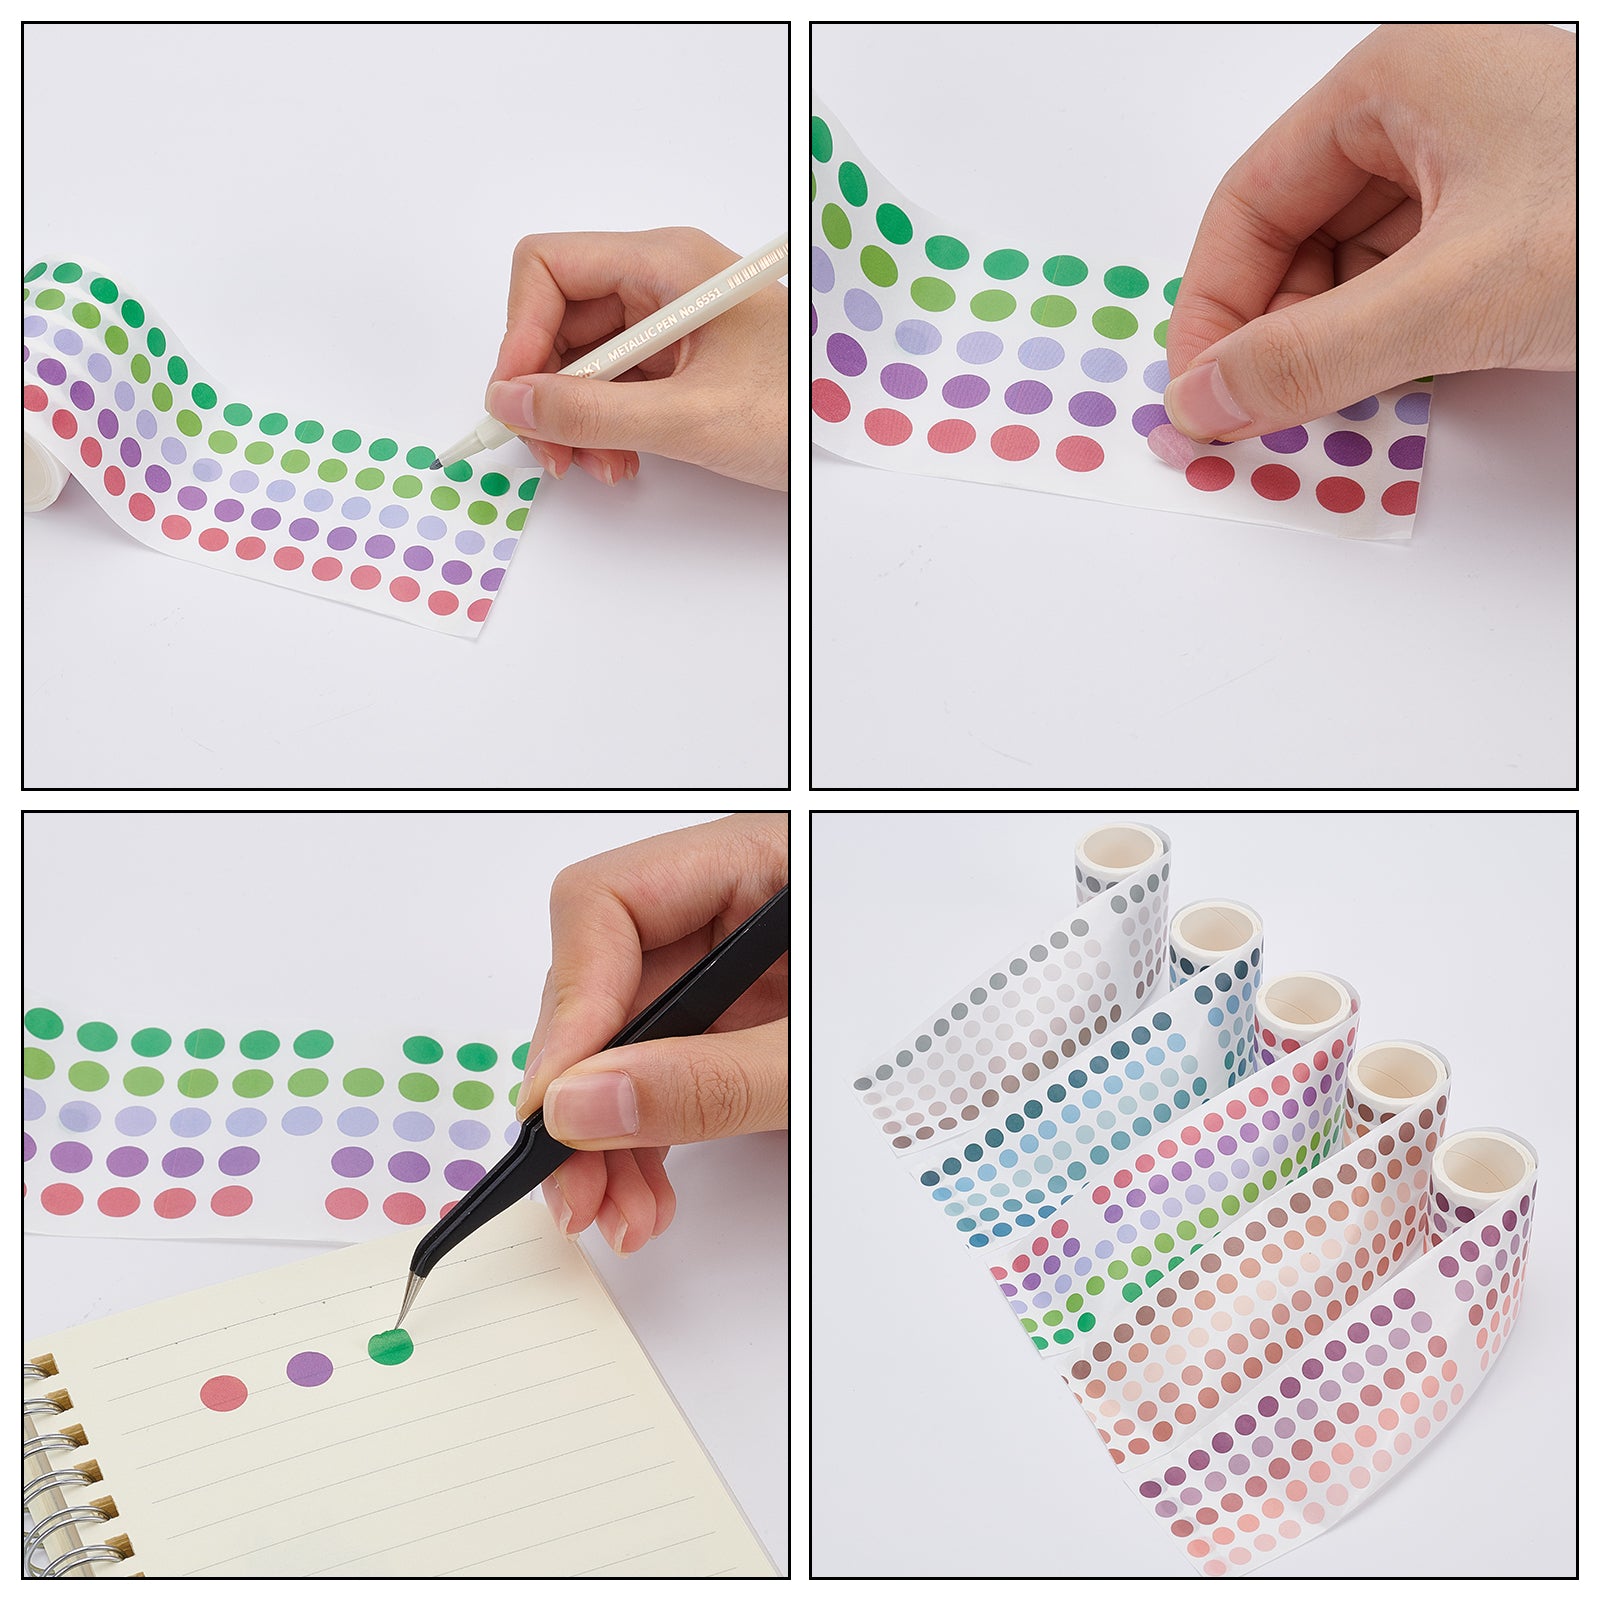 Self-Adhesive Colourful Dot Labels